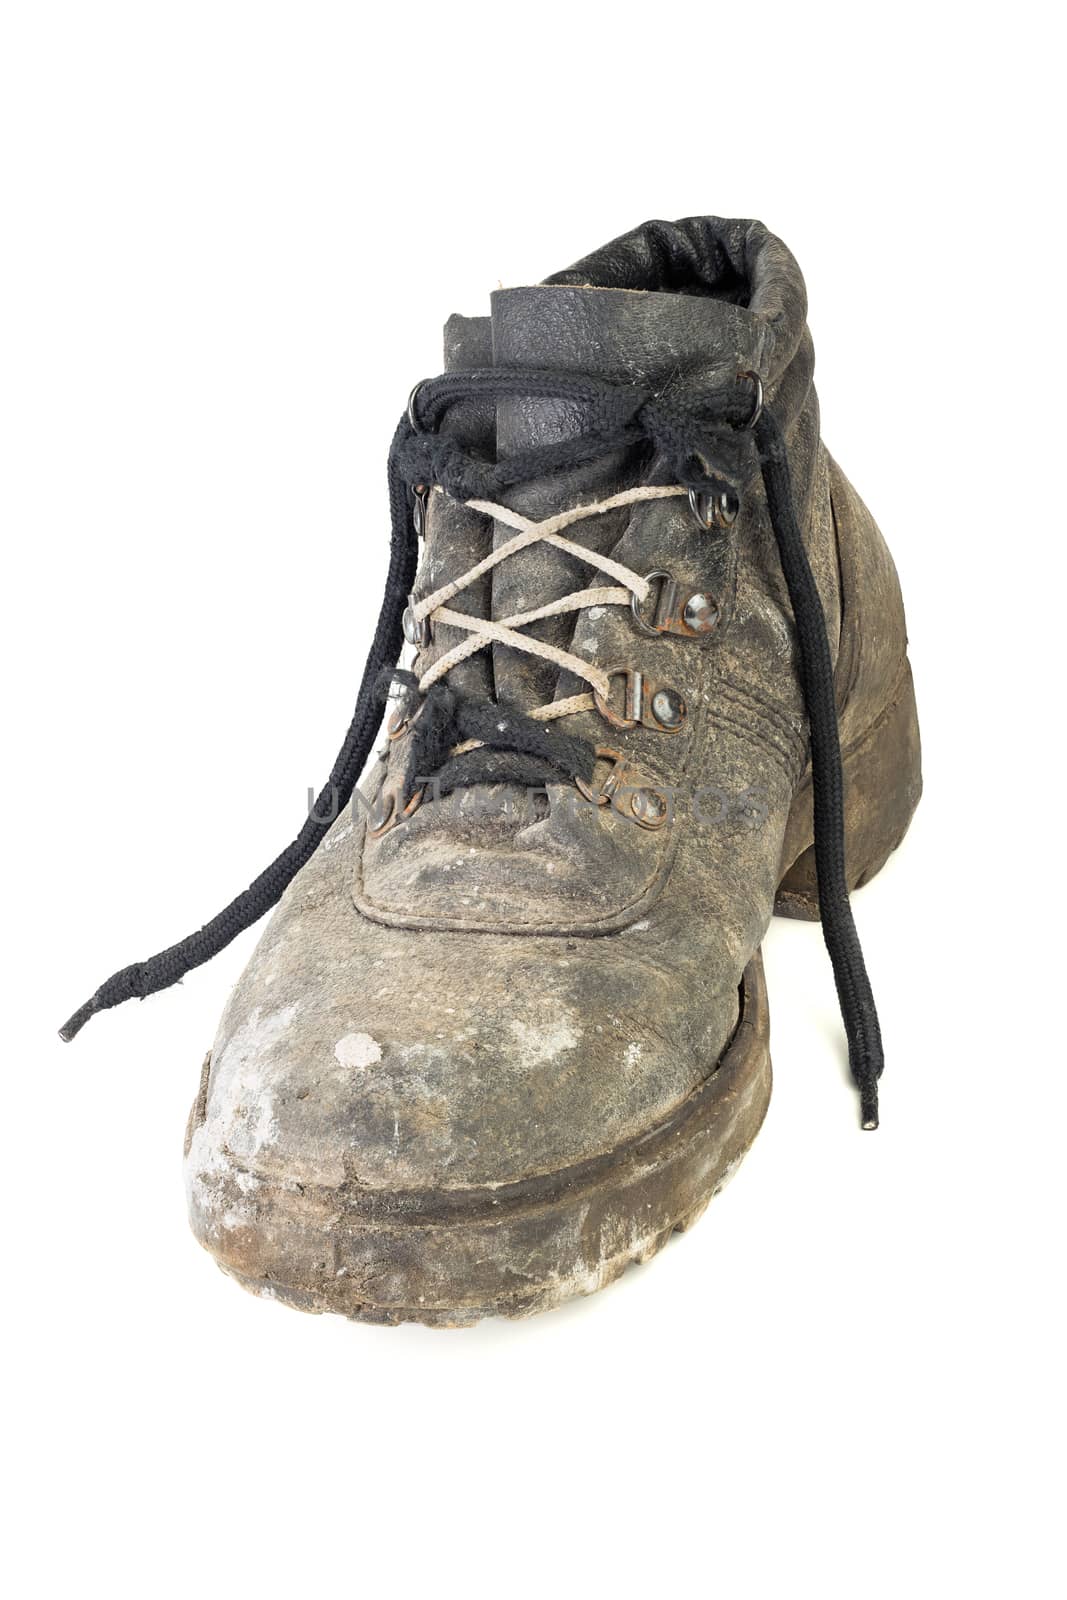 worn-out old work boot, isolated on white background with shadow by z1b